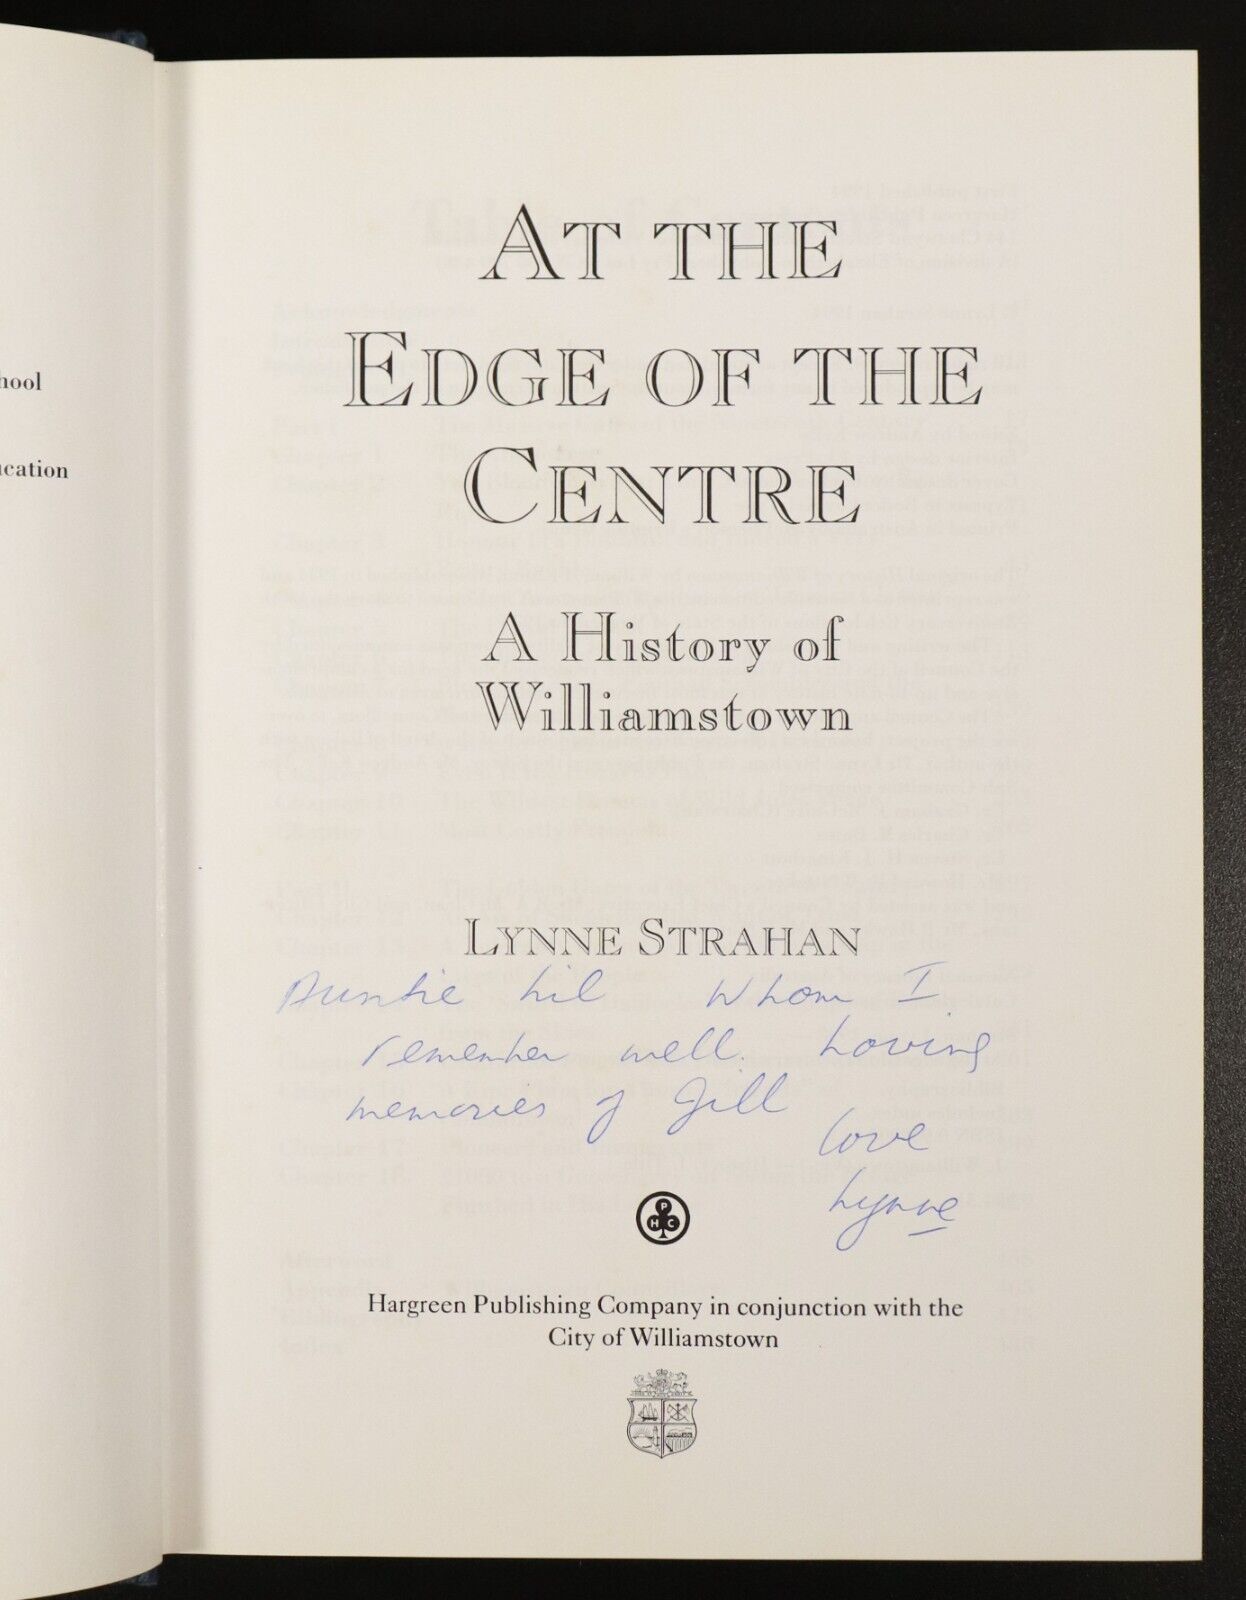 1994 A History Of Williamstown by Lynne Strahan Melbourne Local History Book